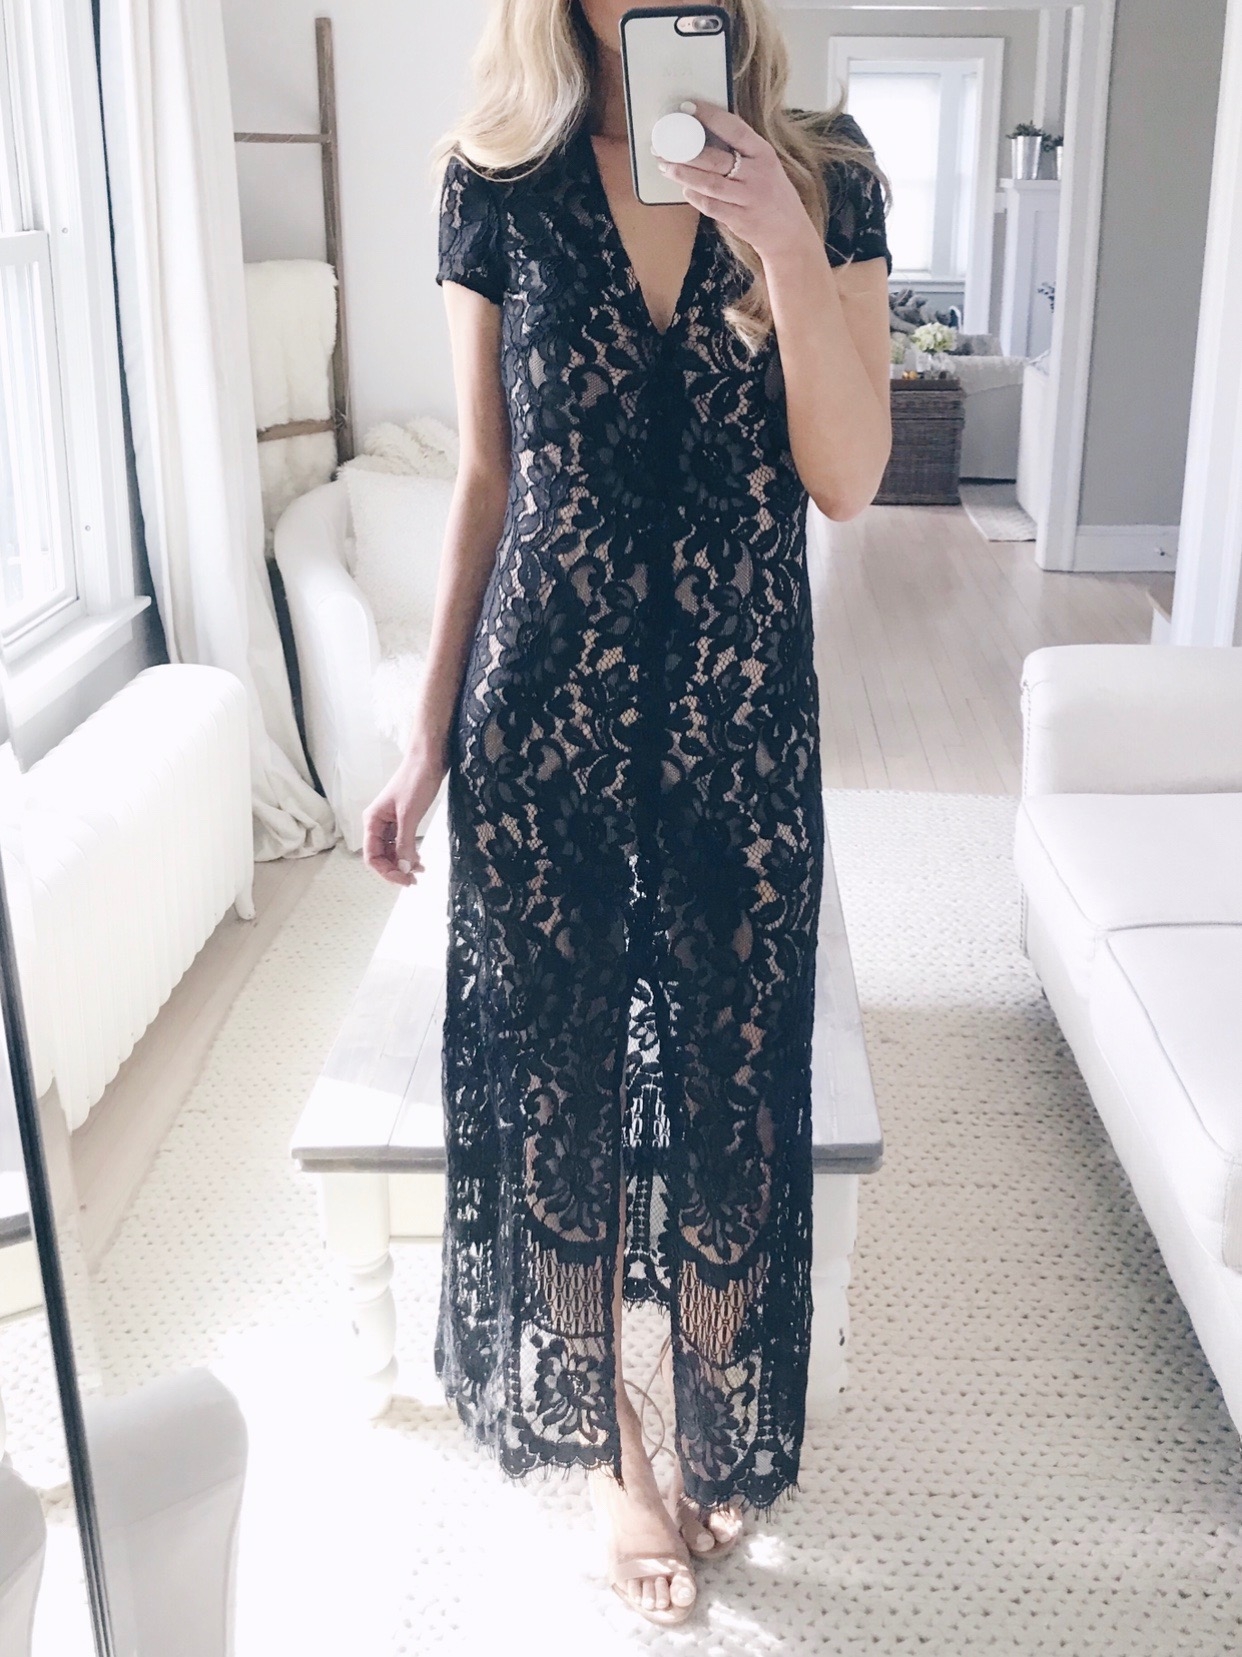 interesting Plans Connecitcut Fashoin blogger in black lace maxi dress